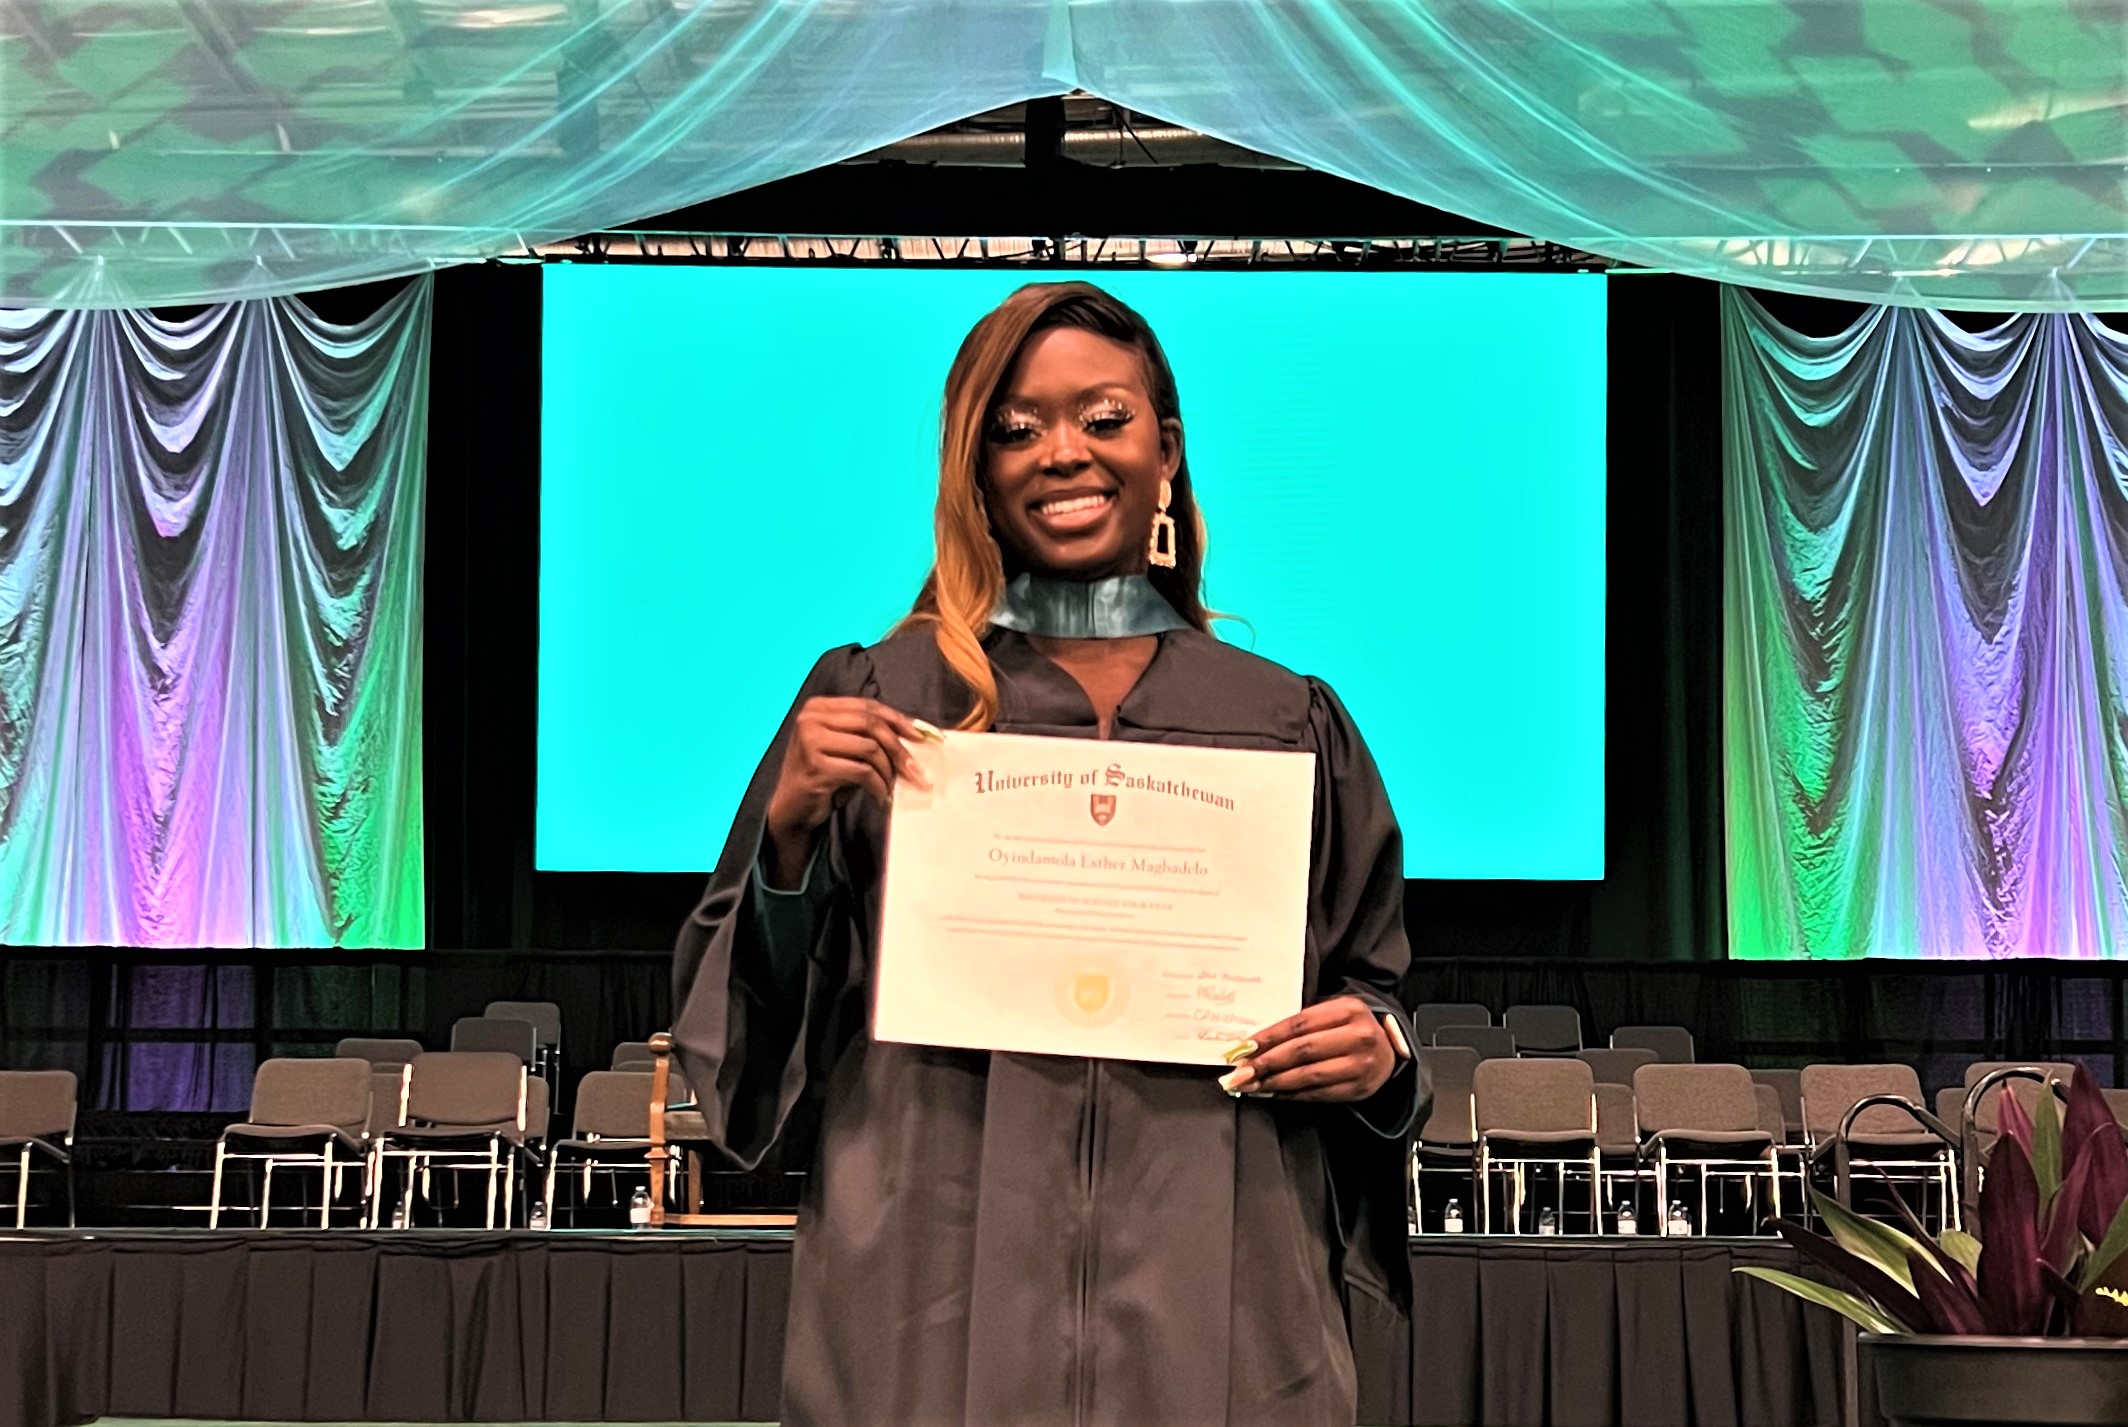 Oyin Magbadelo graduated from the University of Saskatchewan last week with a Bachelor of Science (BSc) in Biomedical Neuroscience with a minor in Psychology. (Submitted photo)